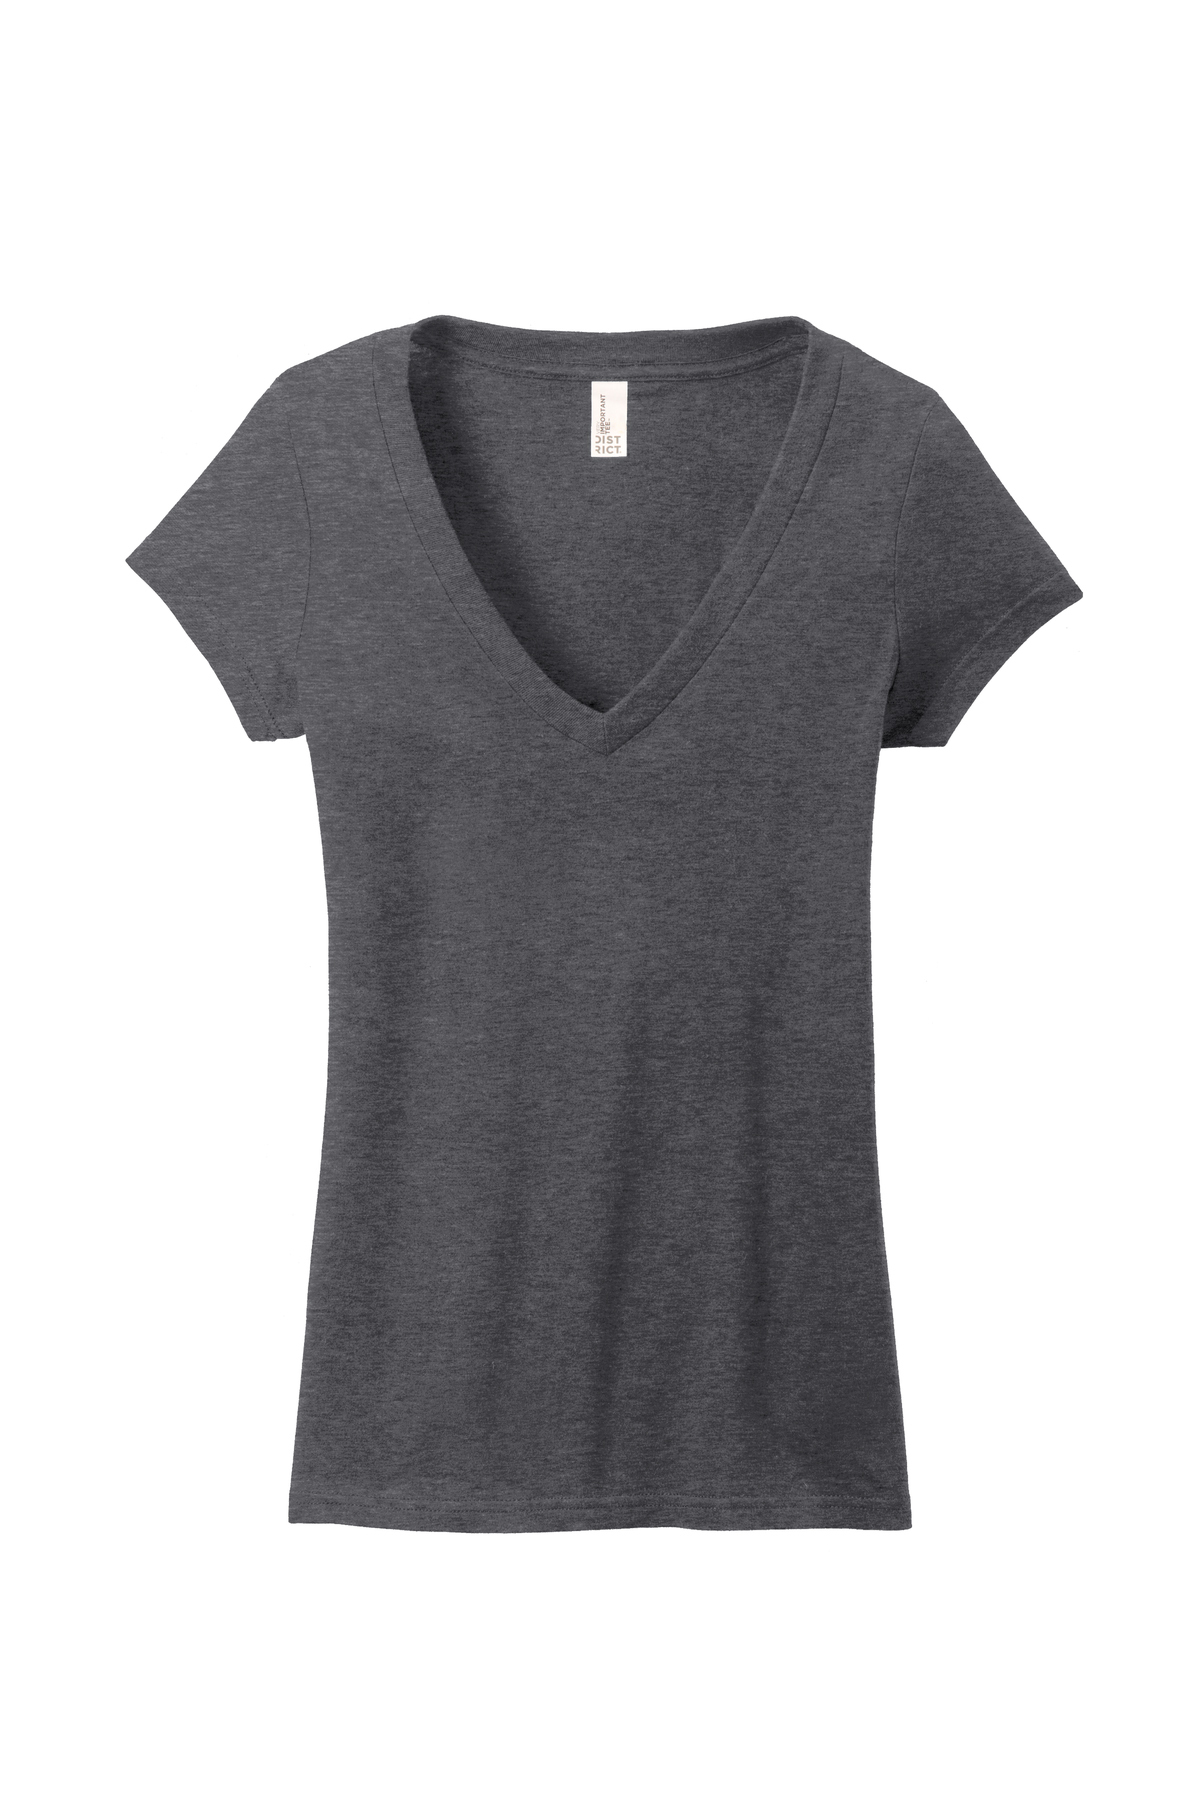 District ® Juniors Very Important Tee ® Deep V-Neck | Product | SanMar